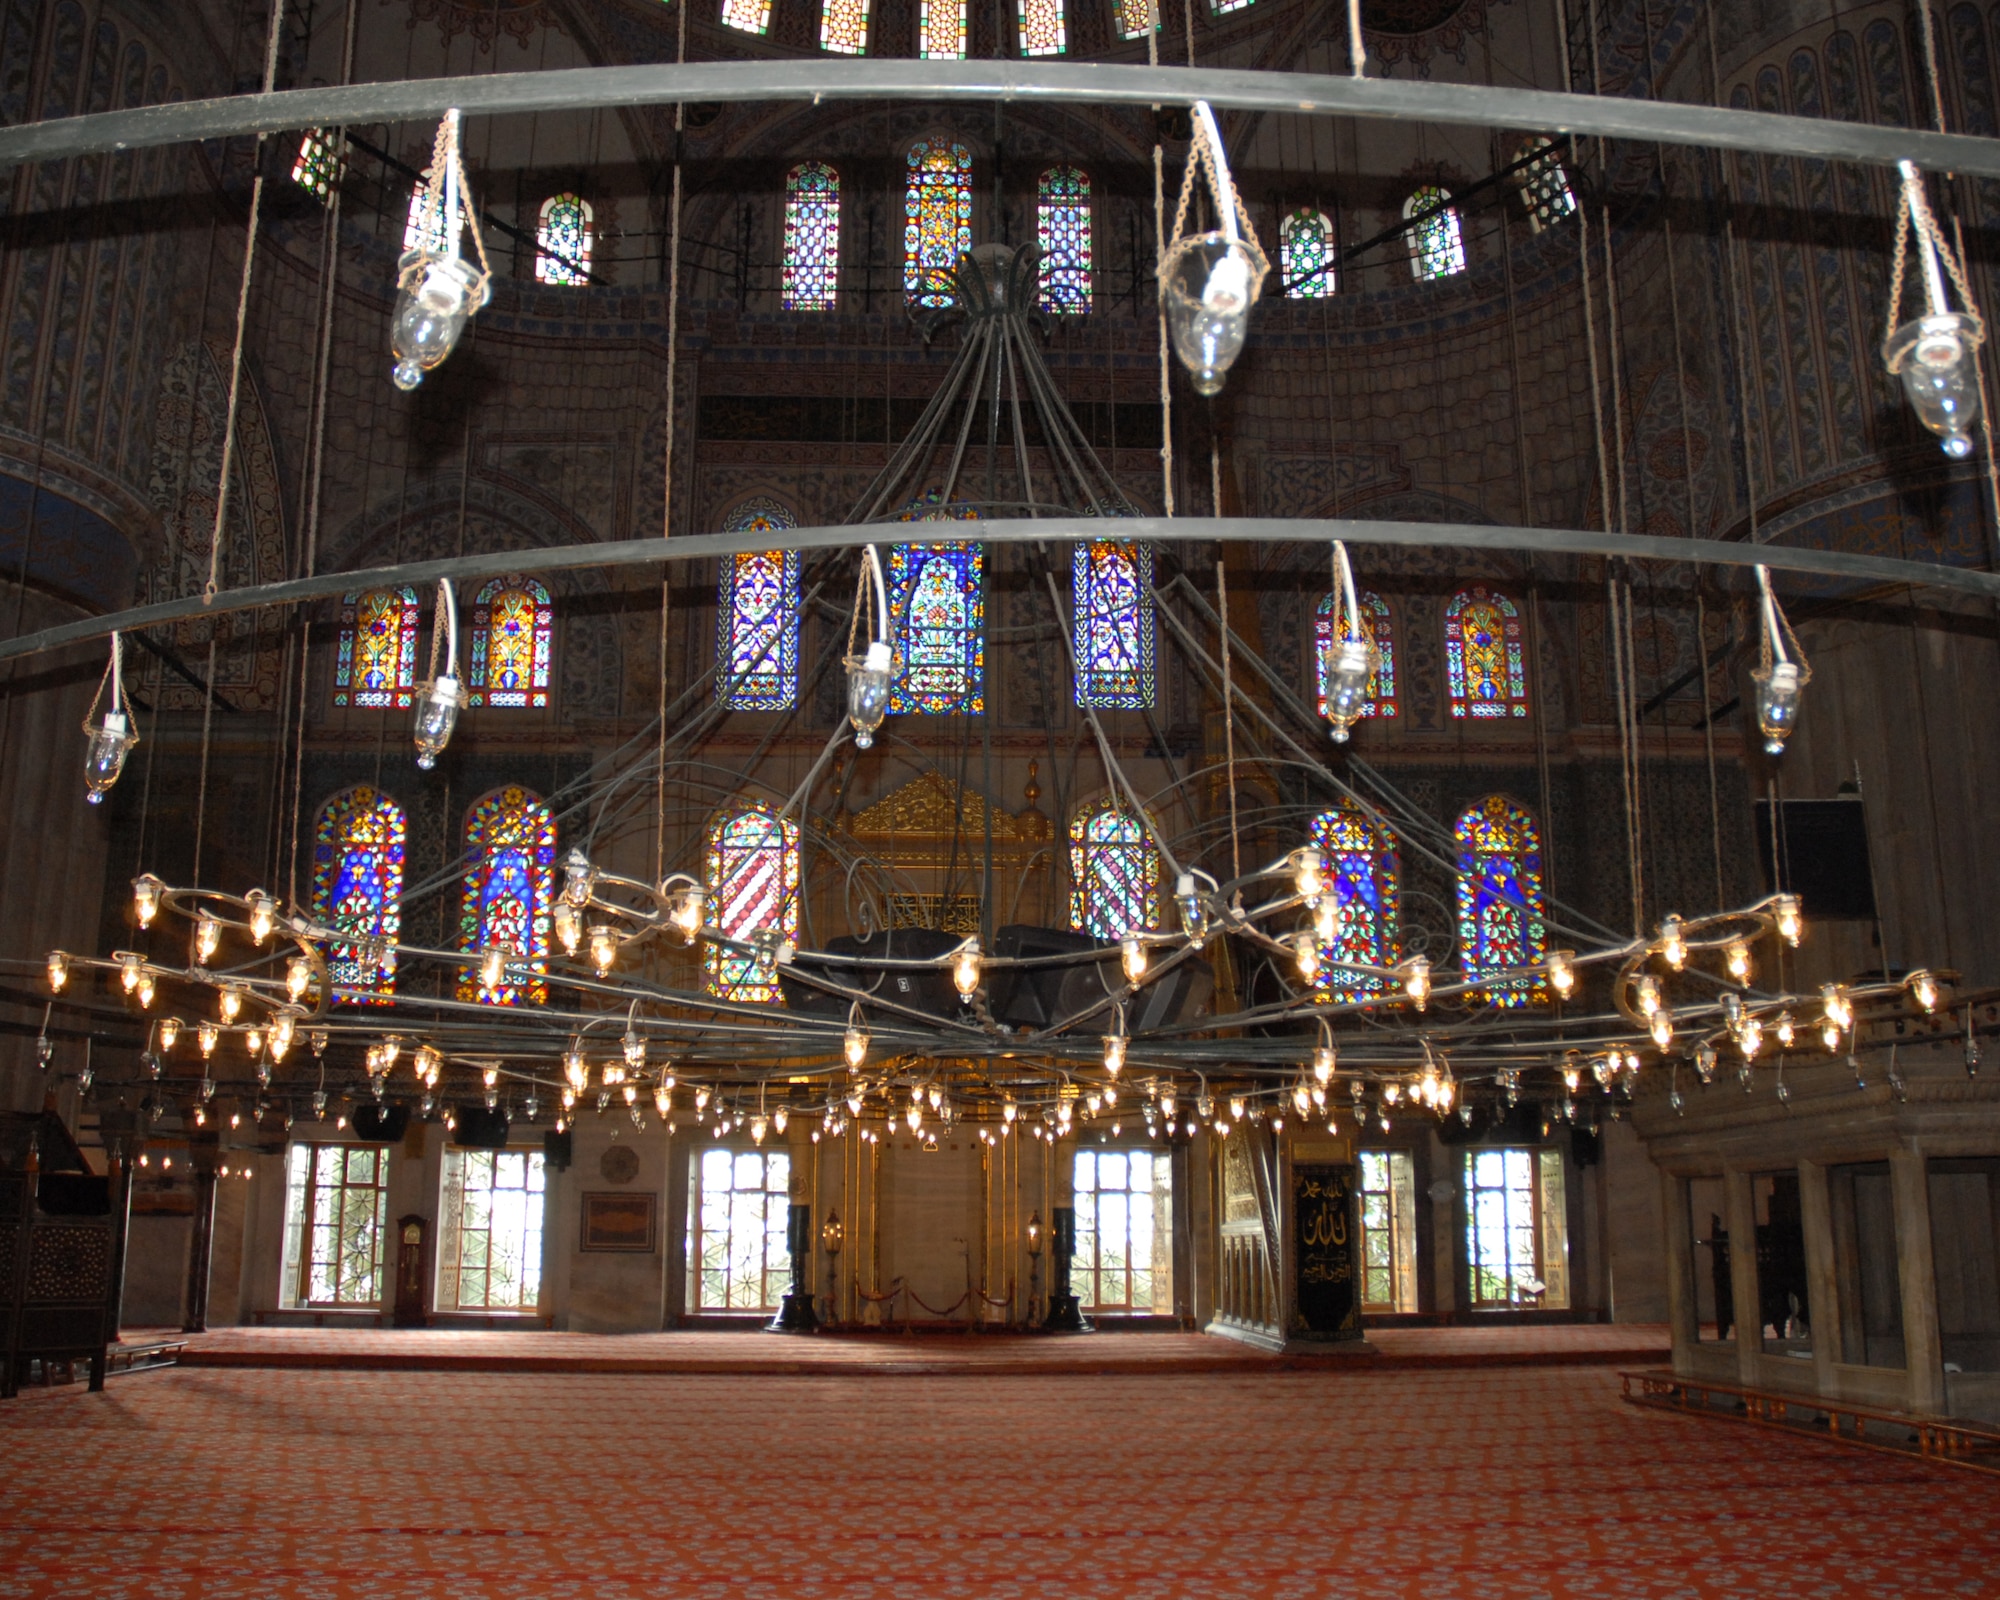 A chandelier hangs from the ceiling of the Sultan Ahmet Mosque or the Blue Mosque in Istanbul Turkey. The Blue Mosque receives its nick-name from the thousands of blue tiles that adorn the interior. Construction on the mosque began in 1606 and concluded in 1616. The mosque has six minarets and 260 windows. (U.S. Air Force photo/Staff Sgt. Lauren Padden)
